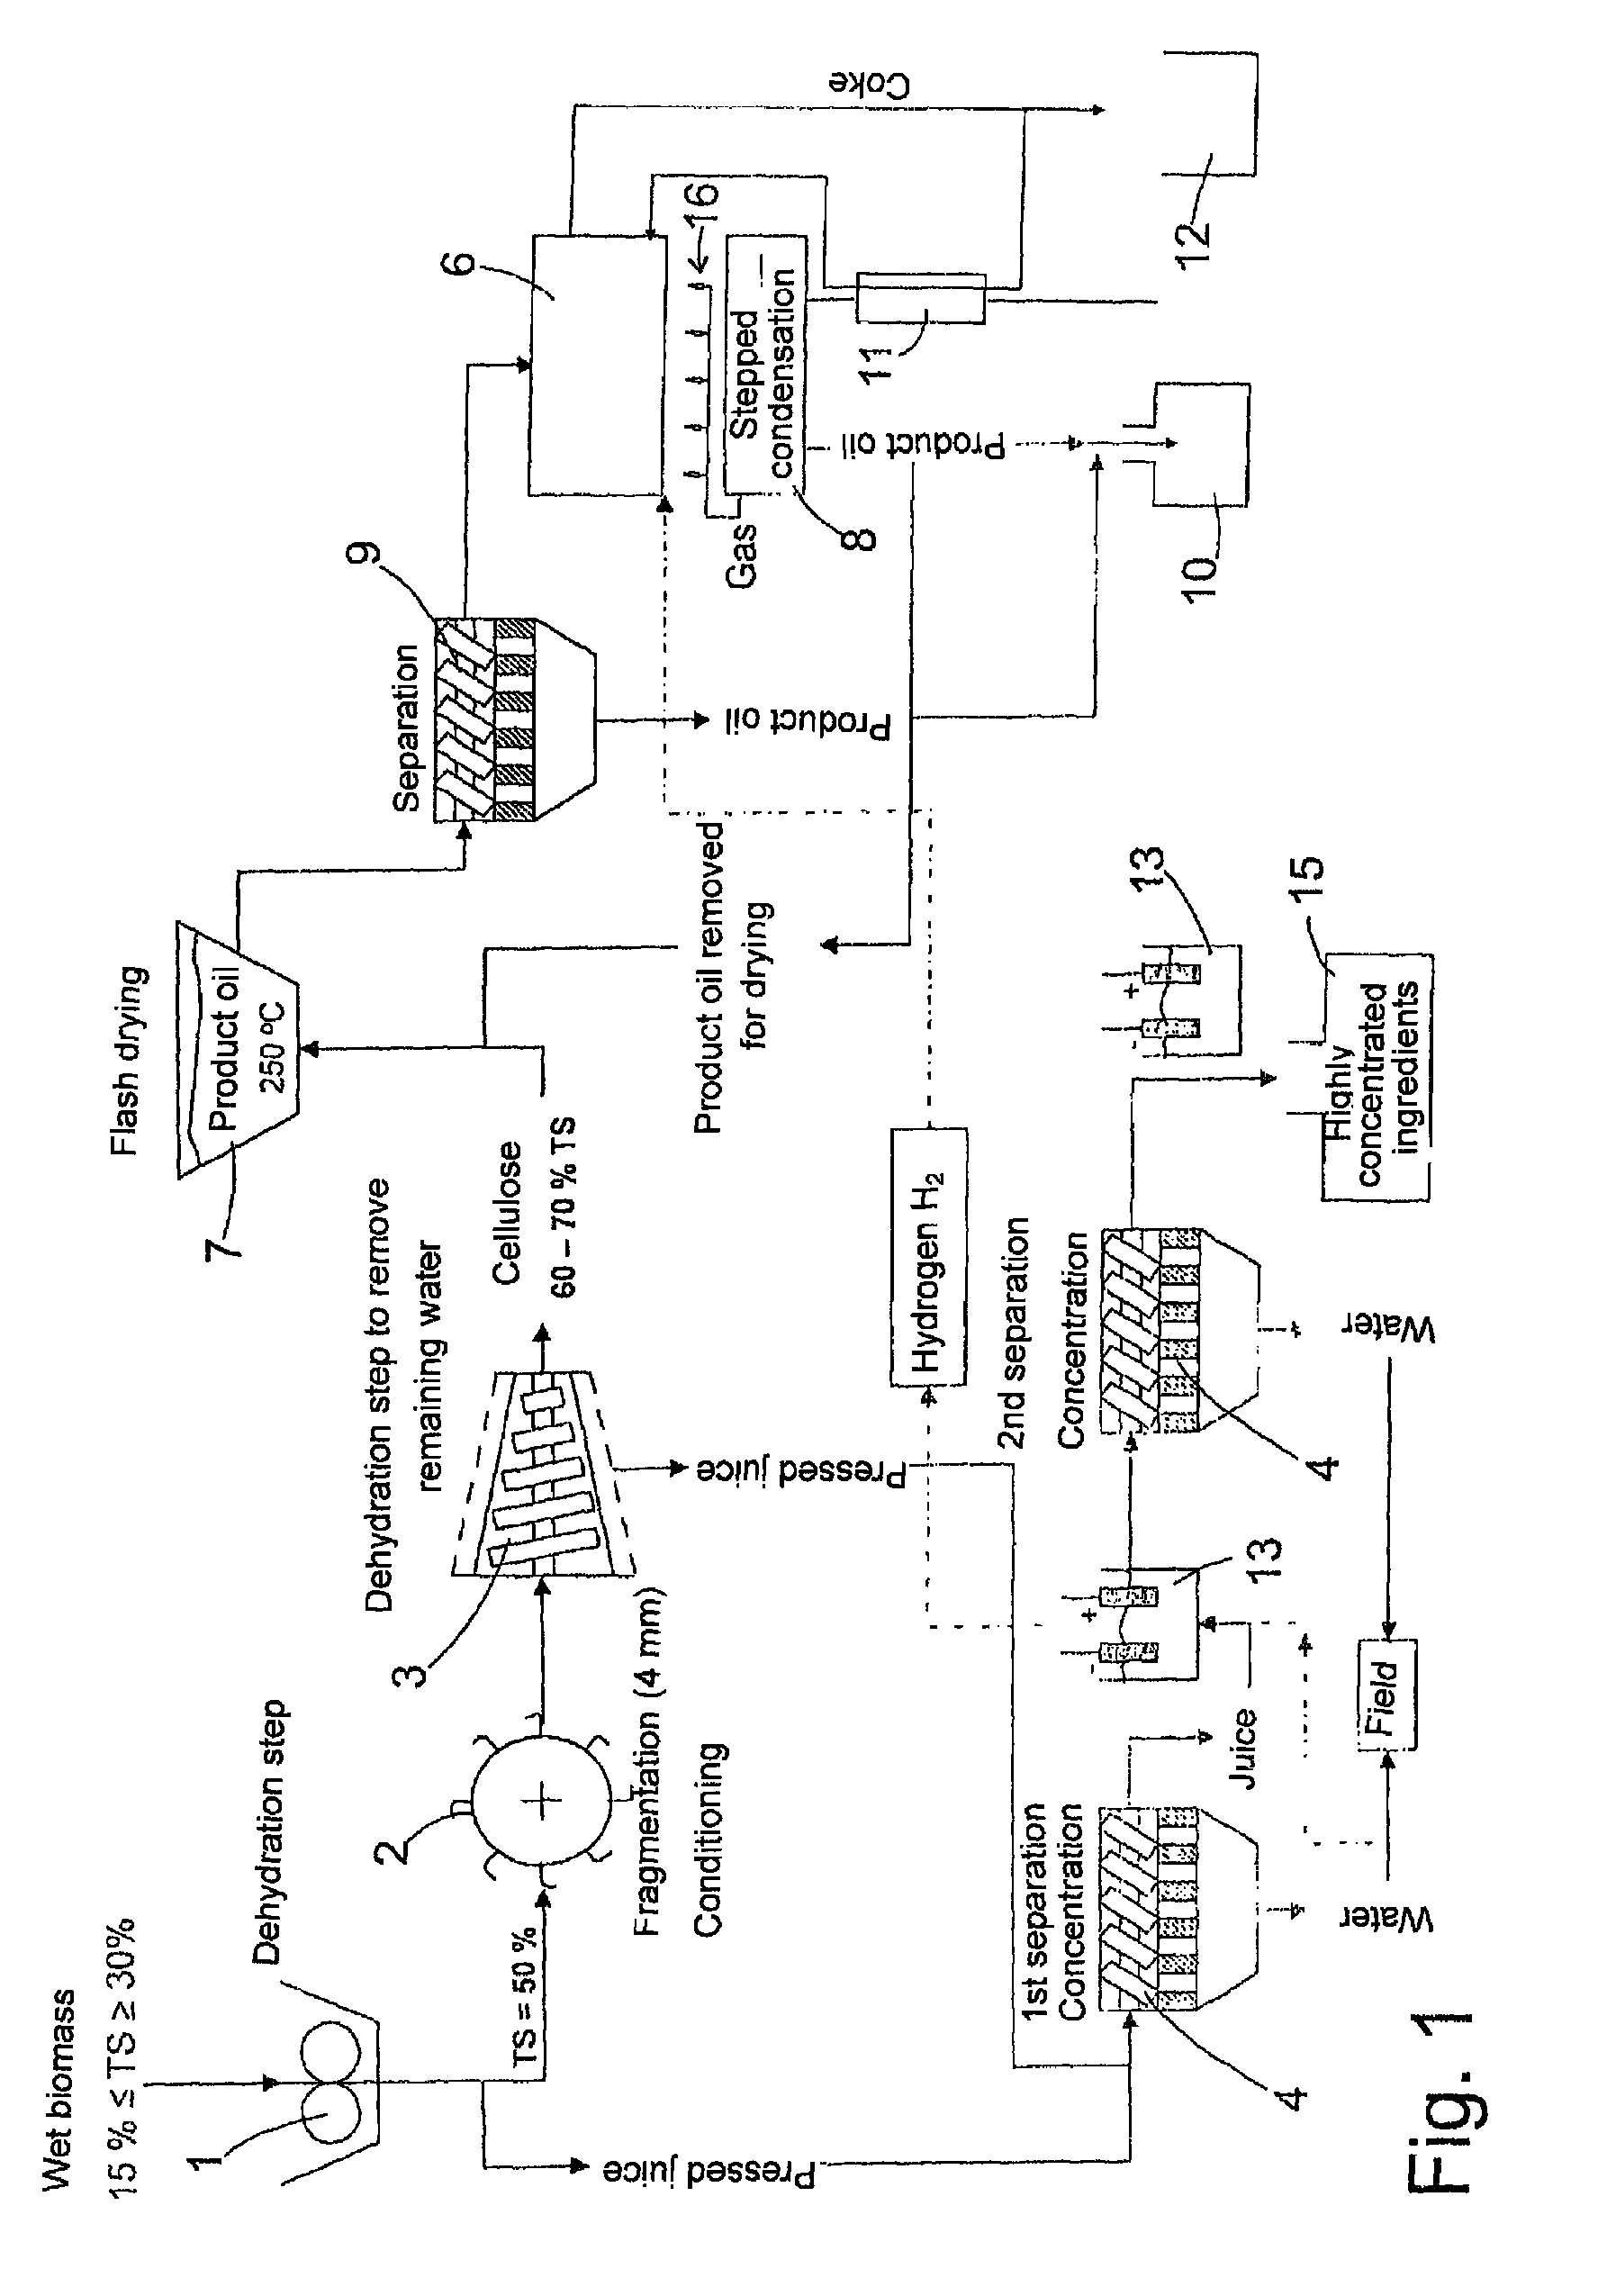 Device and method for obtaining energy carriers from moist biomass